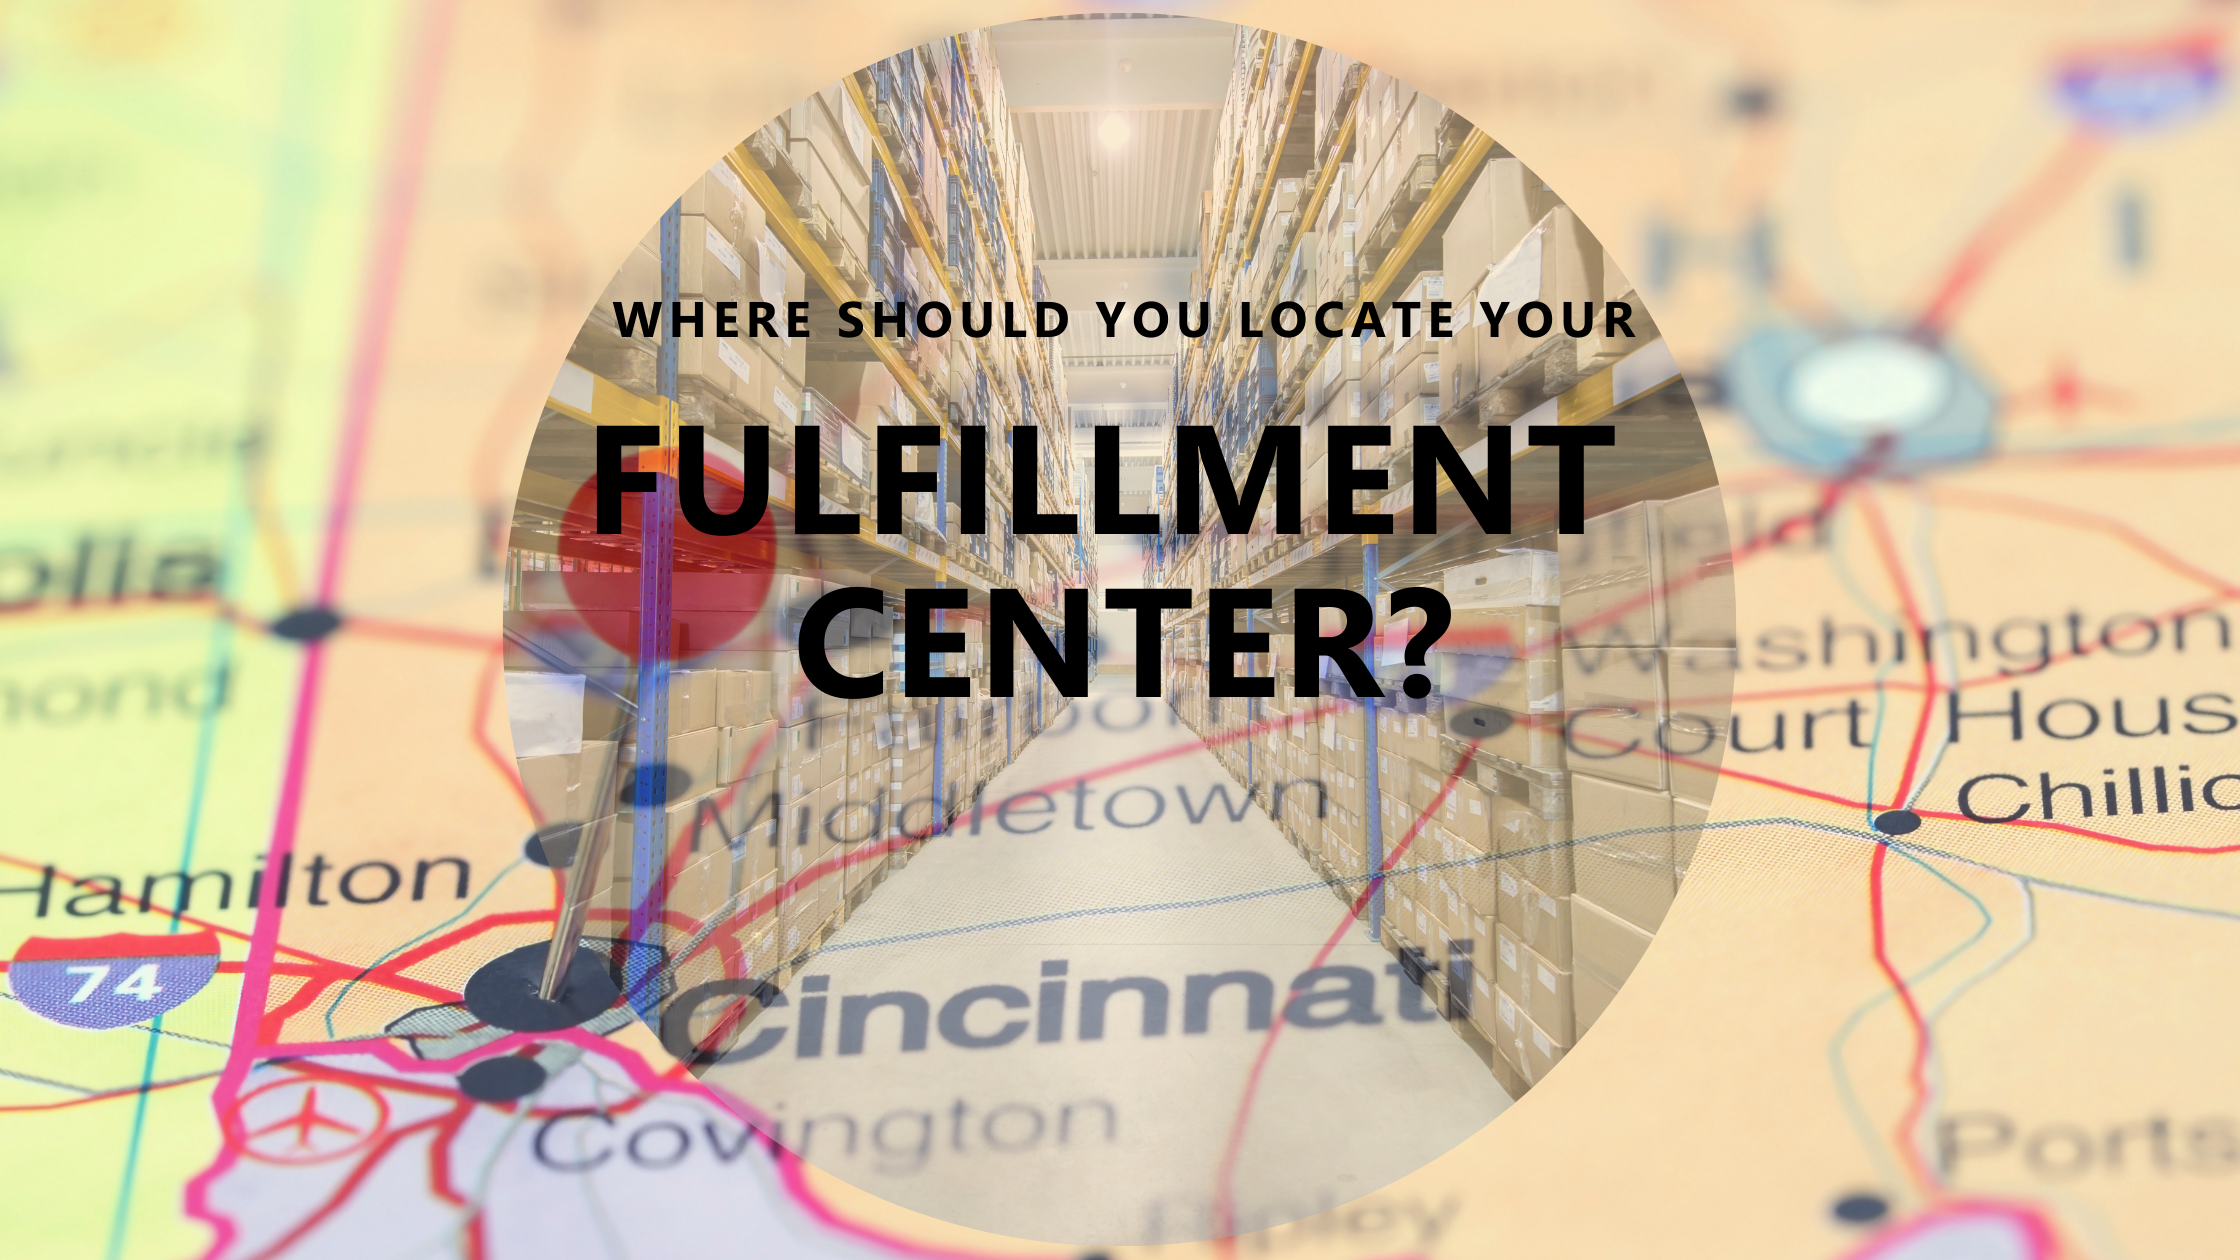 where-should-you-locate-your-fulfillment-center-text-on-warehouse-overlay-on-cincinnati-area-map